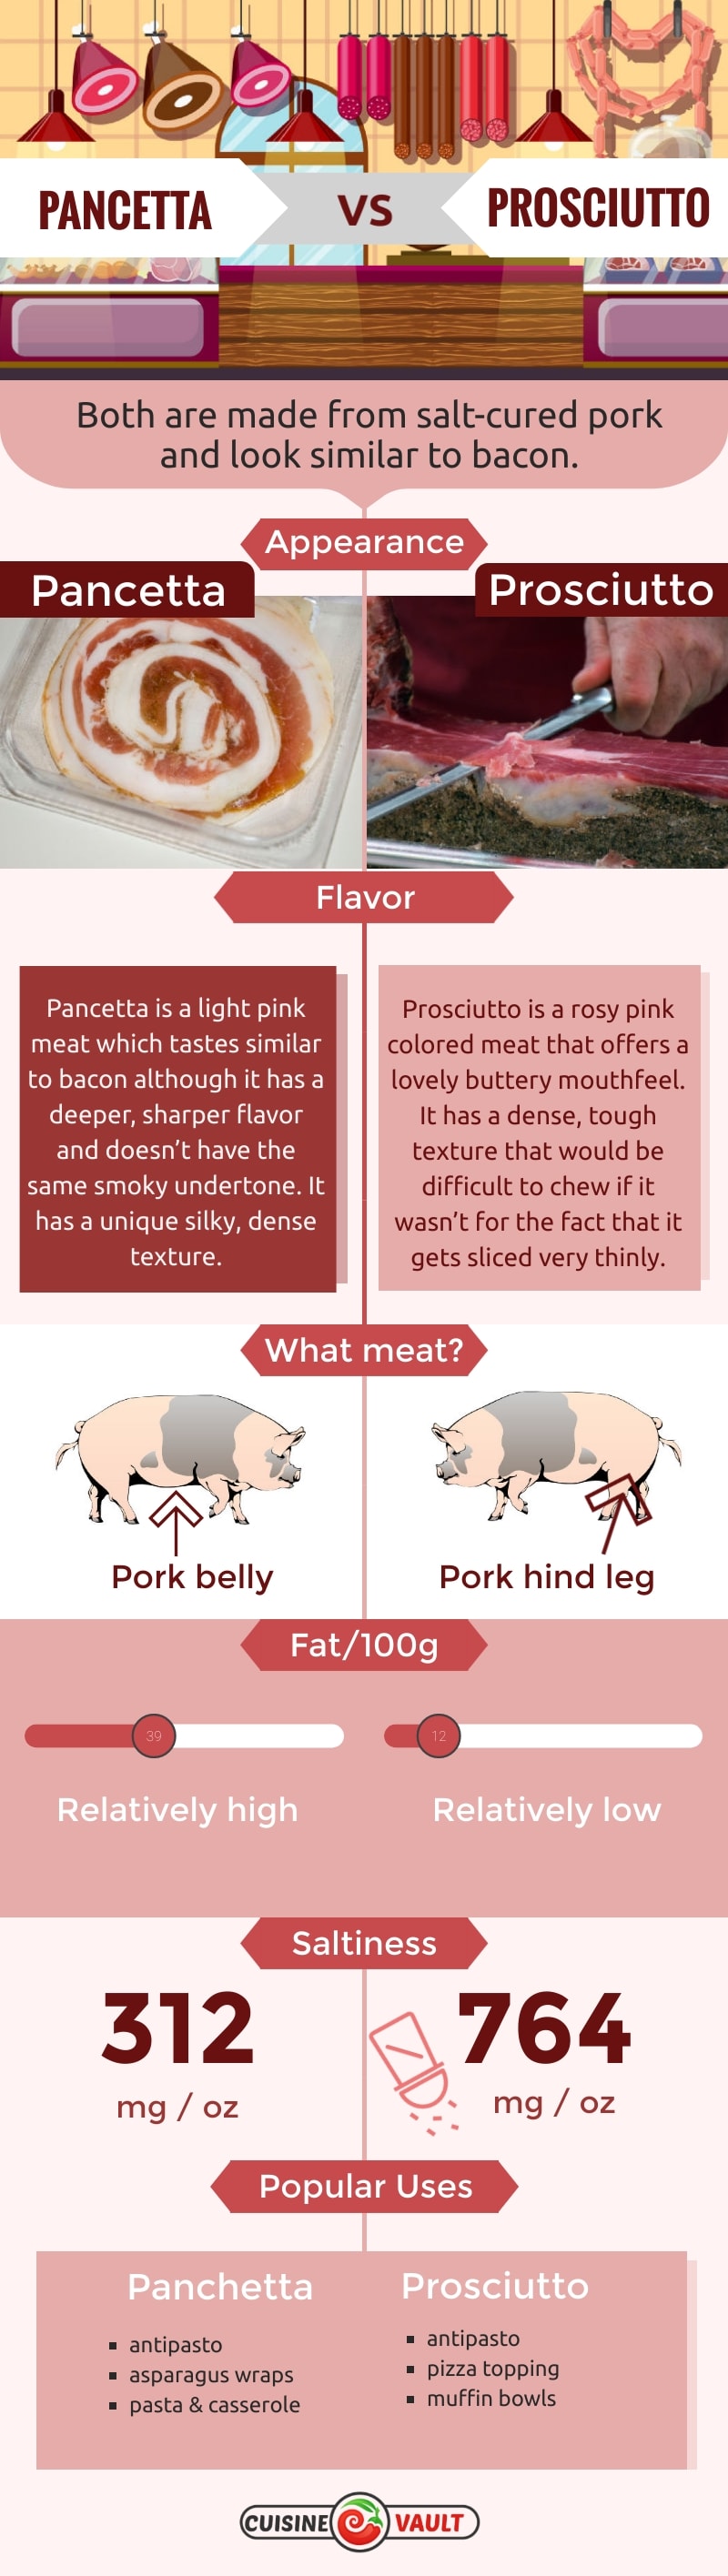 An infographic comparing pancetta and prosciutto